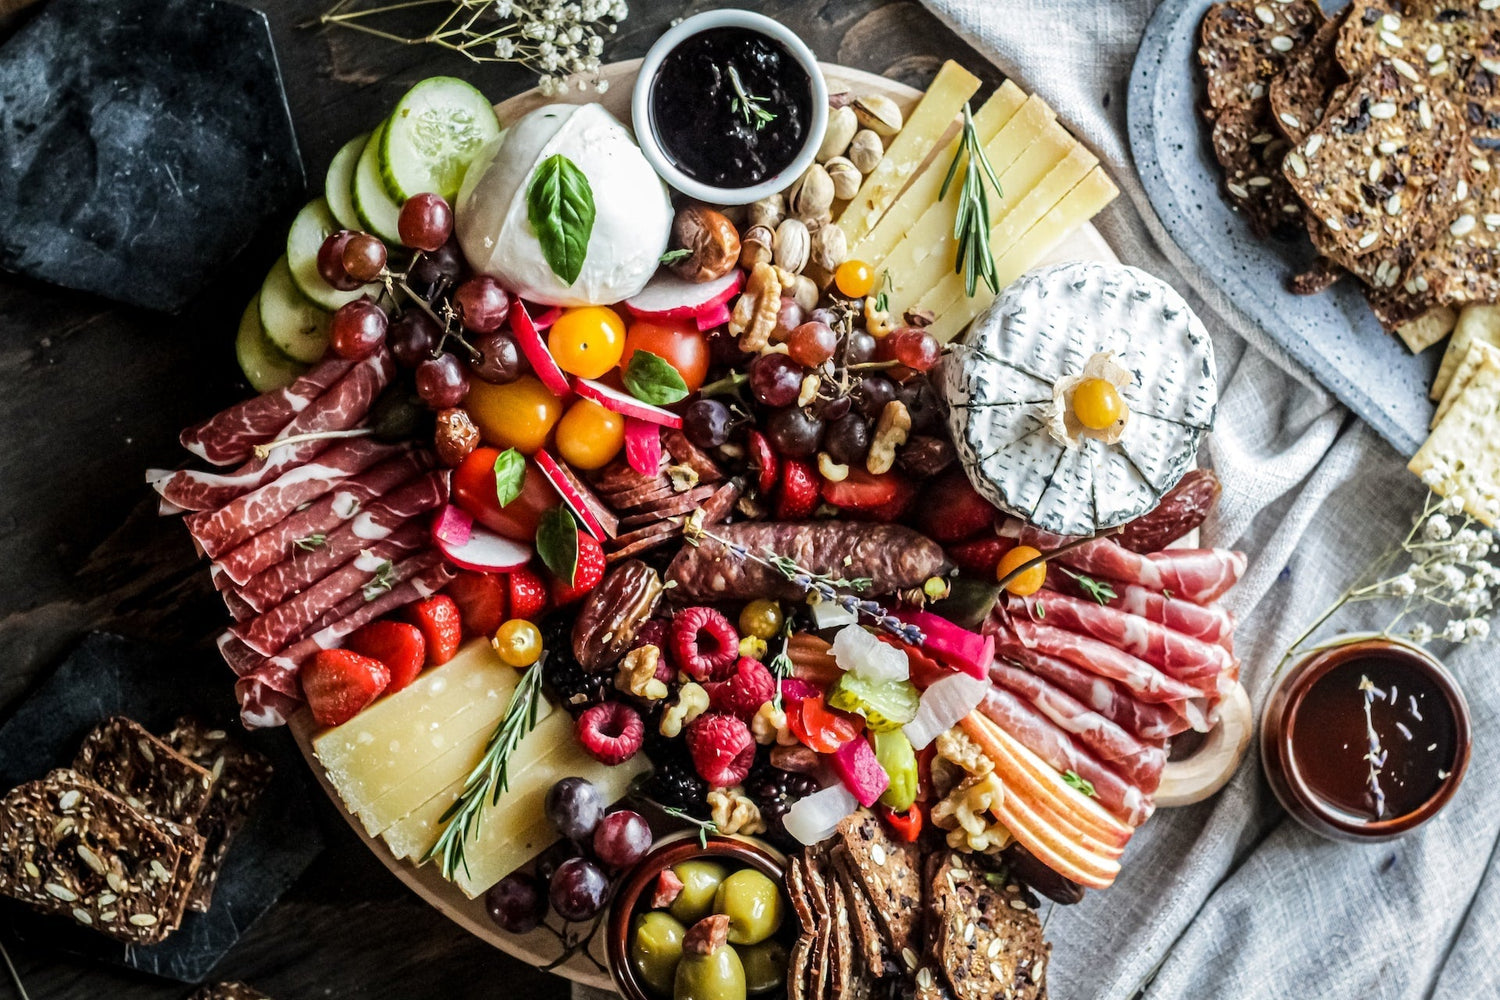 Build a Well-Rounded Charcuterie Board With These 7 Tips - Millon Wines